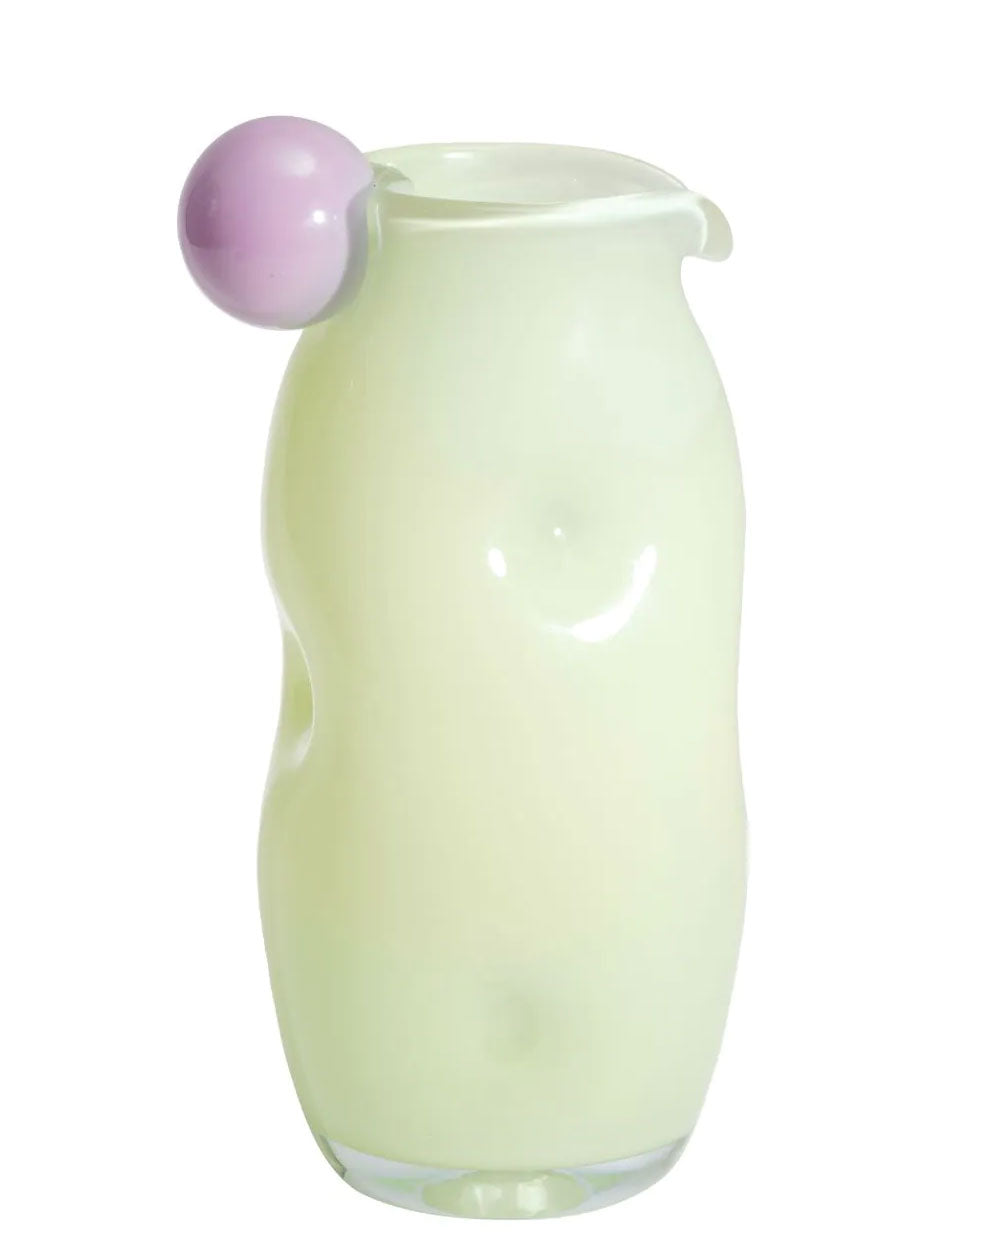 Jug With A Twist in Lavender and Pear